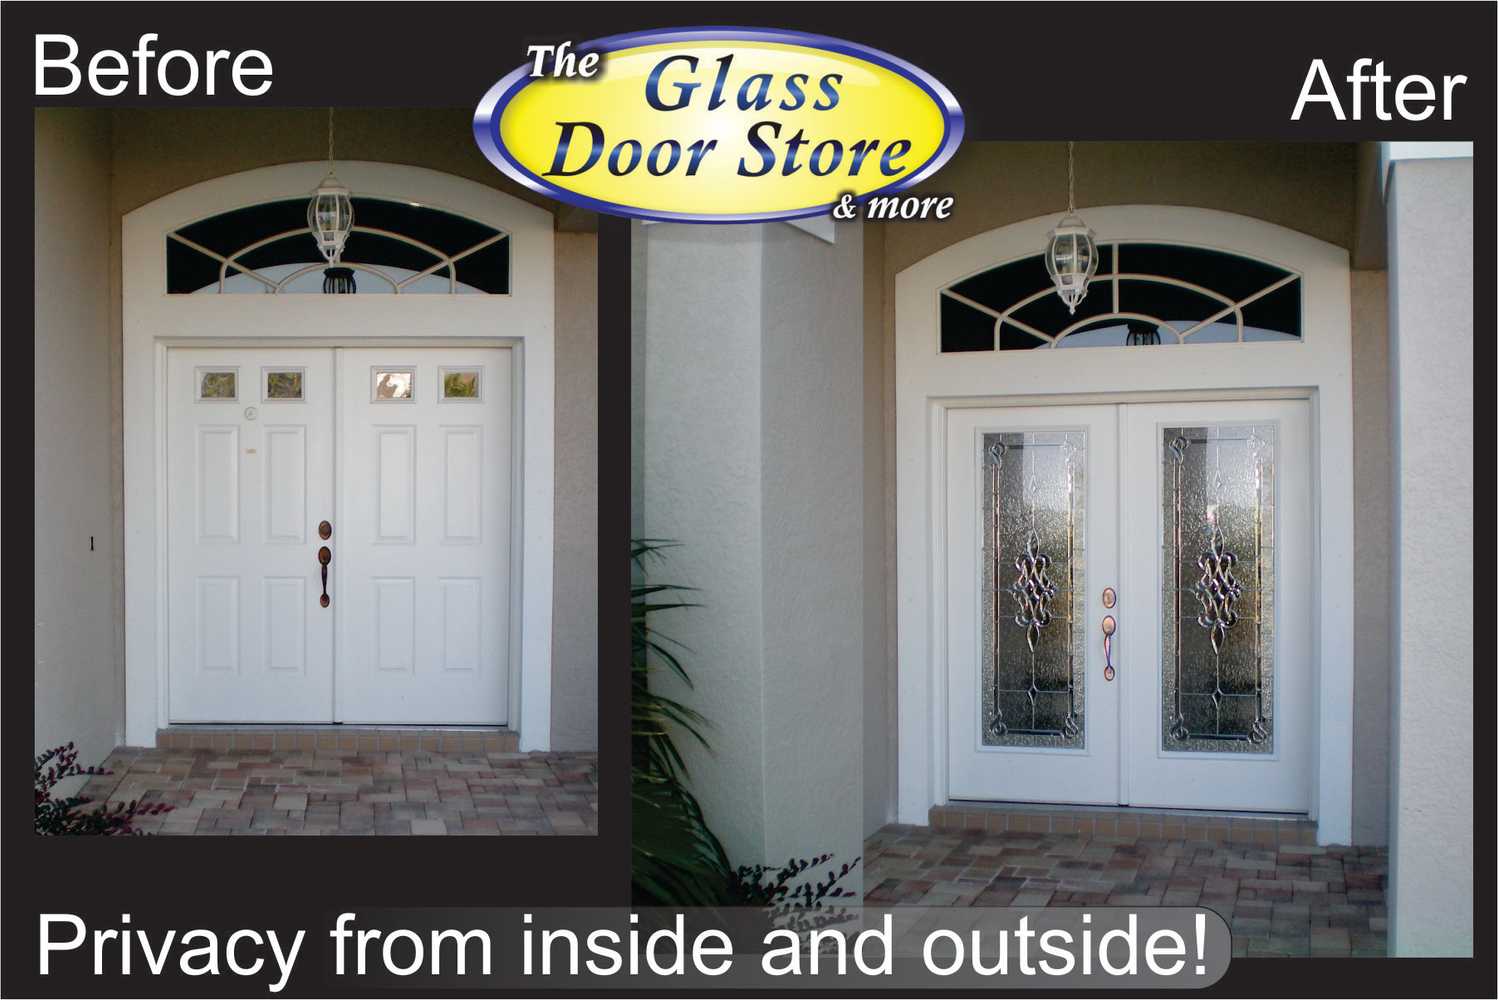 The Glass Door Store & More Inc Project